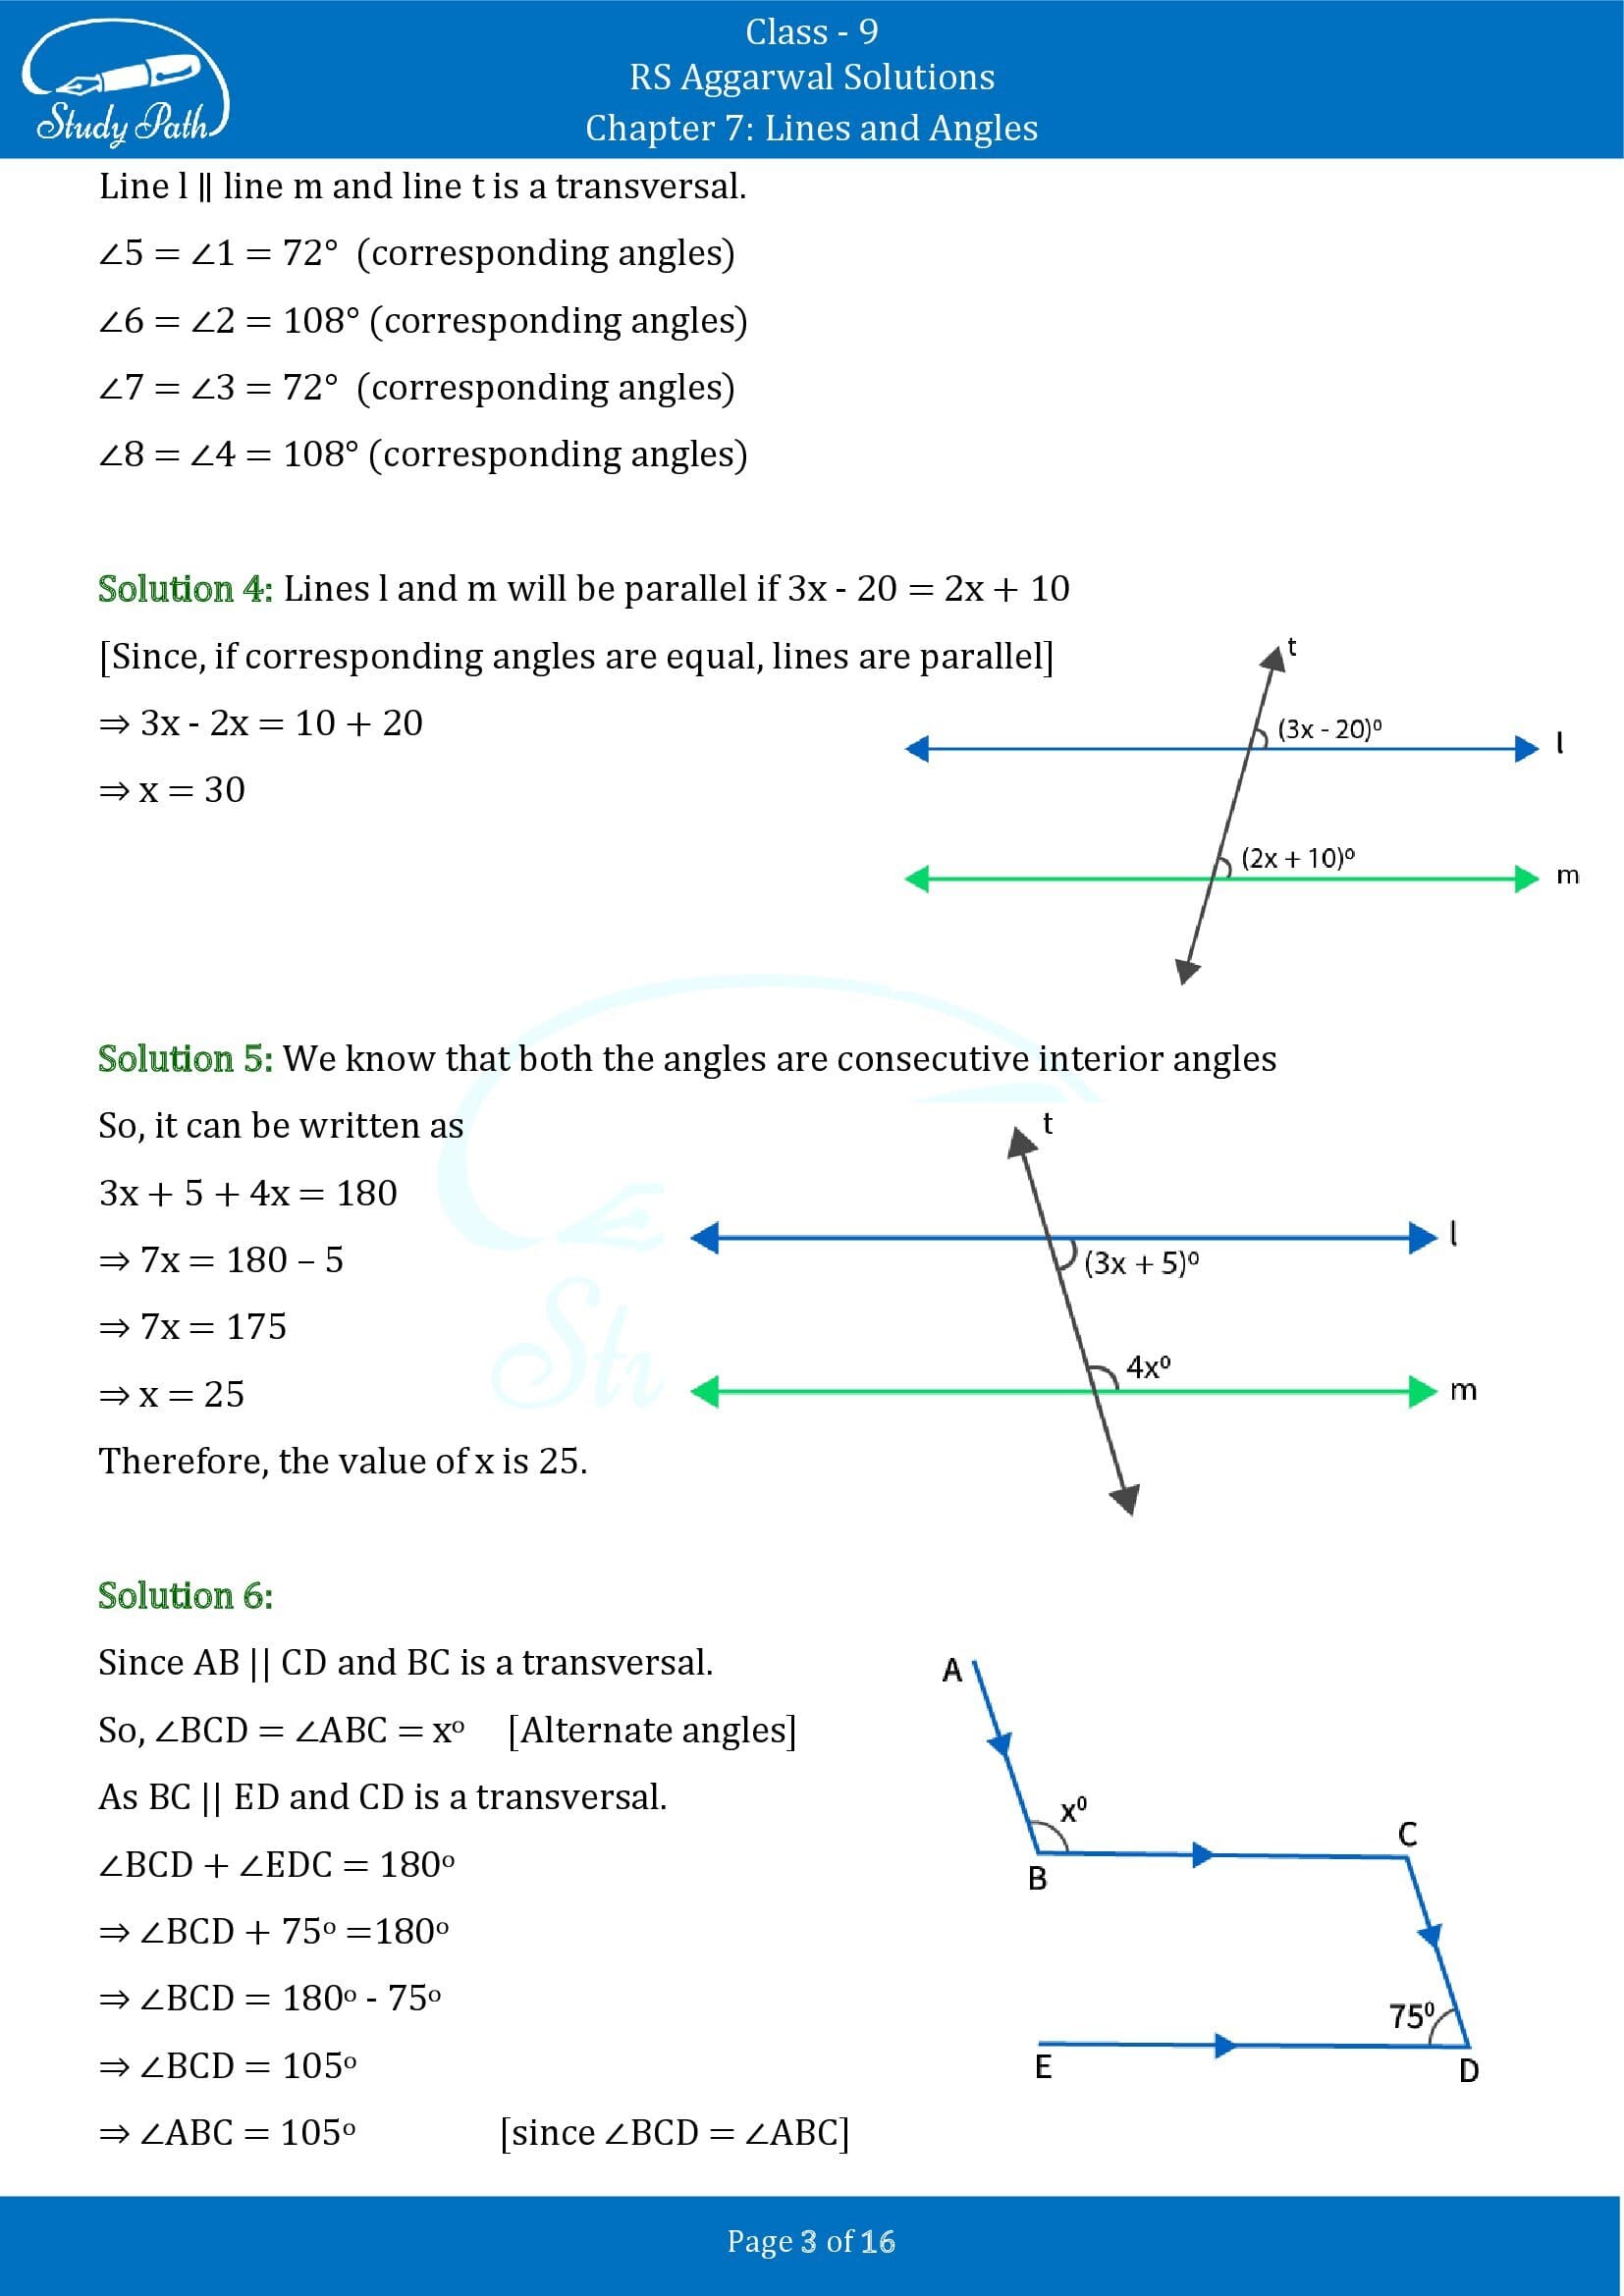 RS Aggarwal Solutions Class 9 Chapter 7 Lines and Angles Exercise 7C 00003